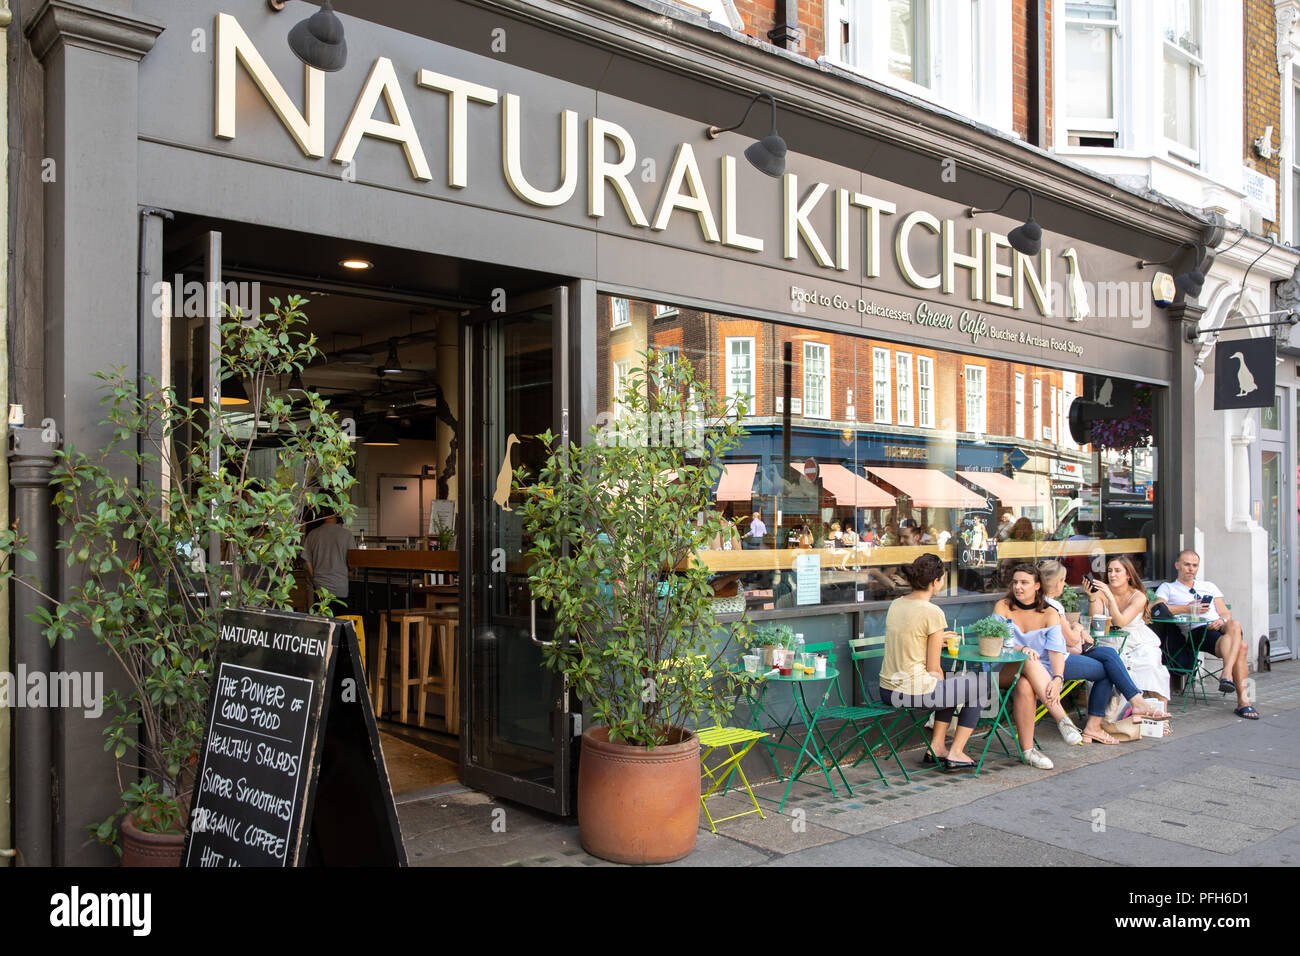 Natural kitchen bar and deli in Marylebone Hight Street, London Stock Photo